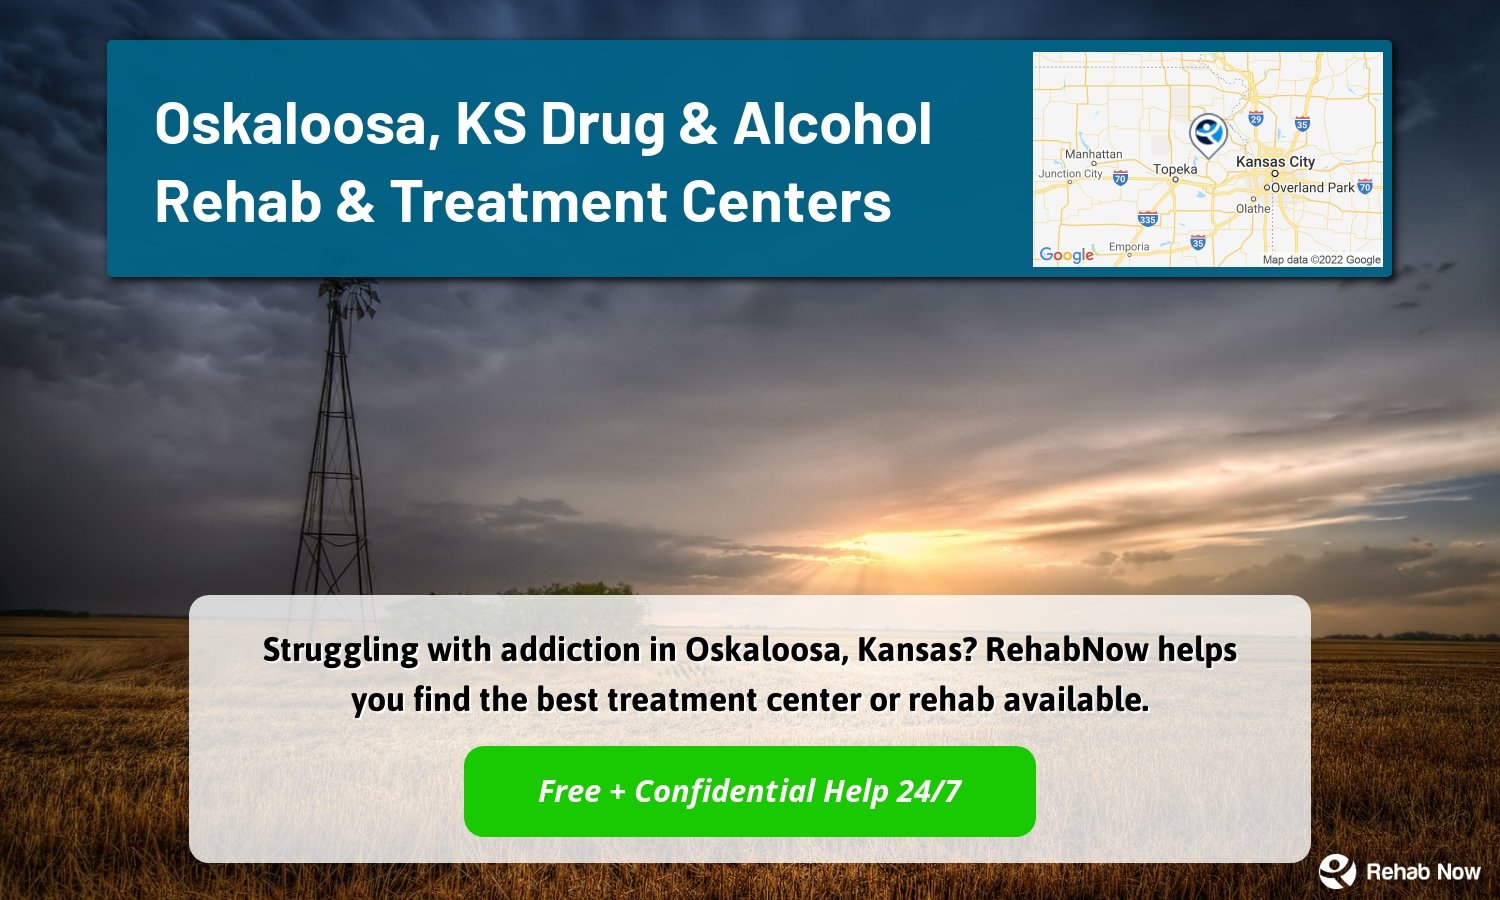 Struggling with addiction in Oskaloosa, Kansas? RehabNow helps you find the best treatment center or rehab available.